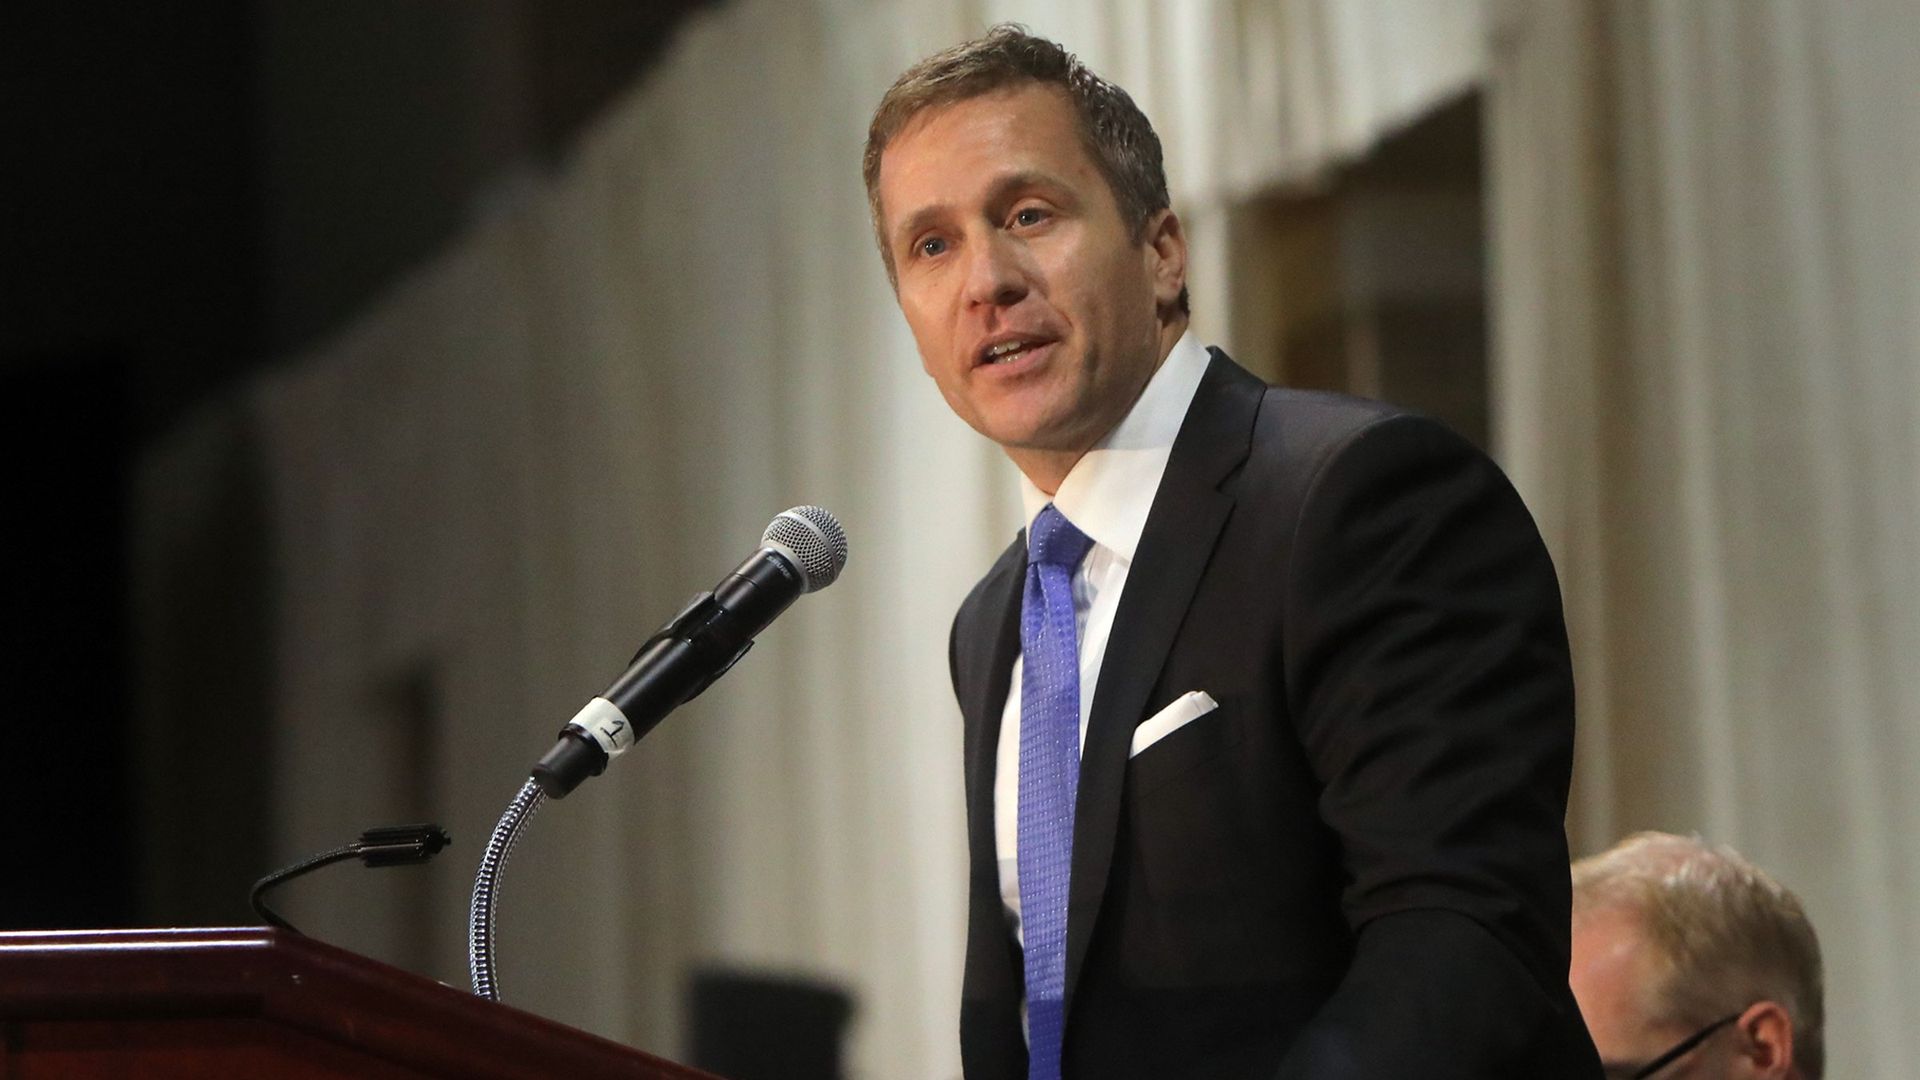 Eric Greitens delivers a speech.